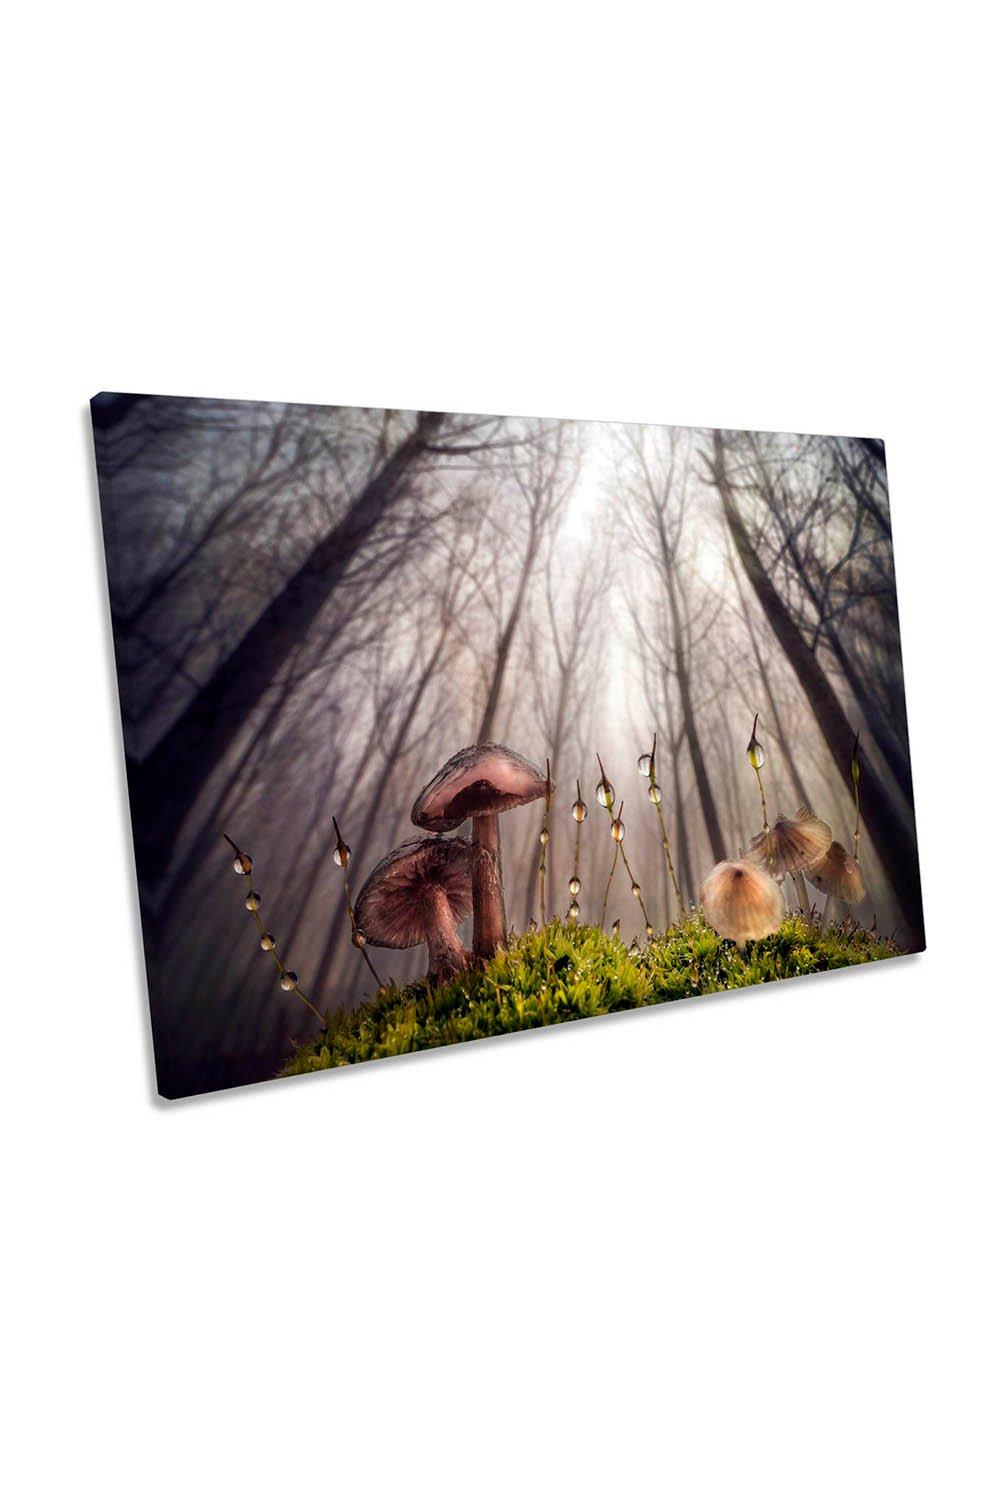 Mushrooms of the Woods Forest Canvas Wall Art Picture Print